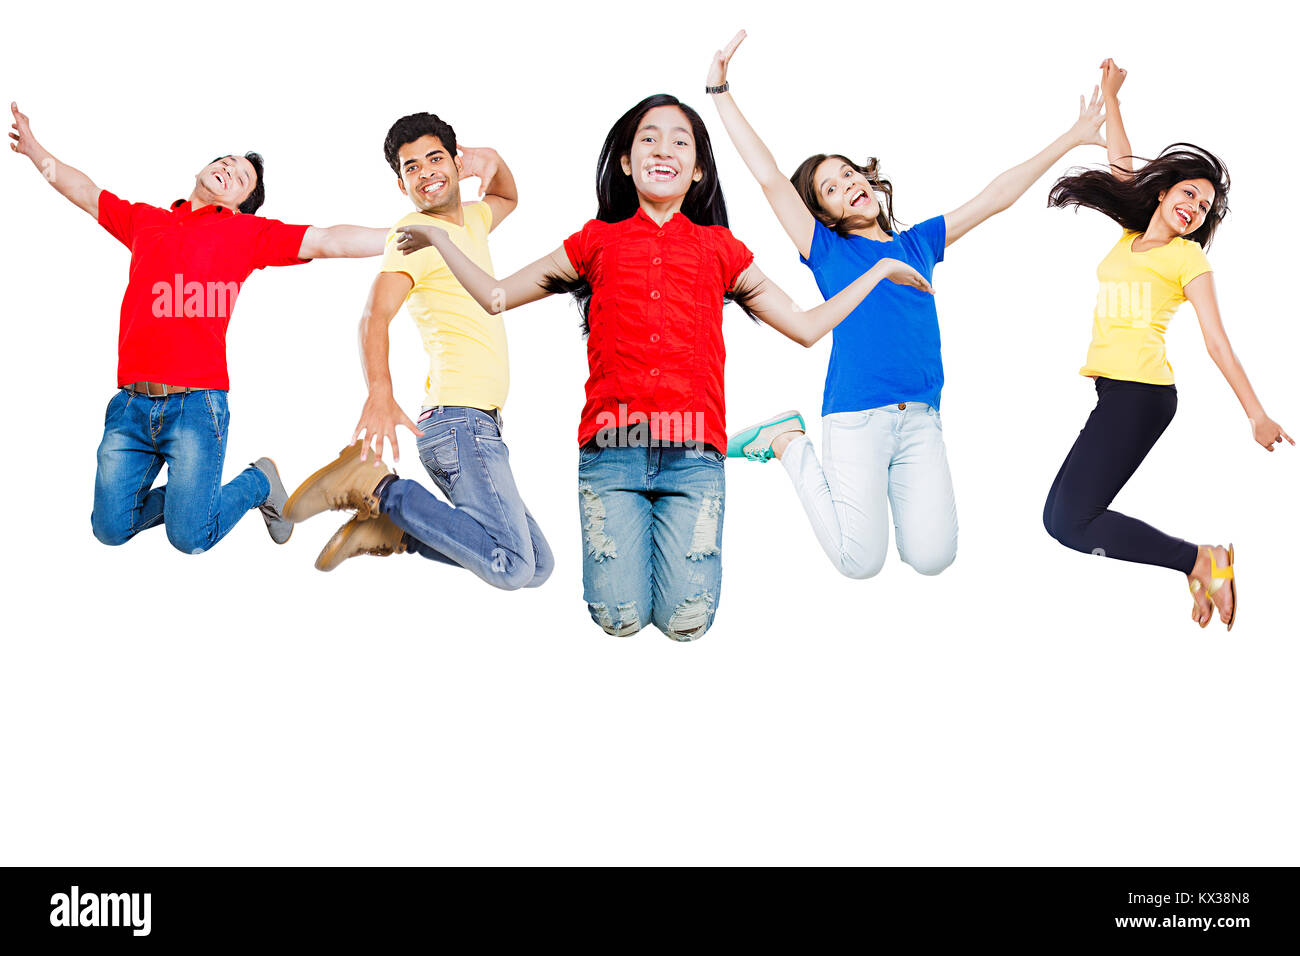 Happy Indian Group Young Teenagers Friends Together Jumping Fun Cheerful Stock Photo